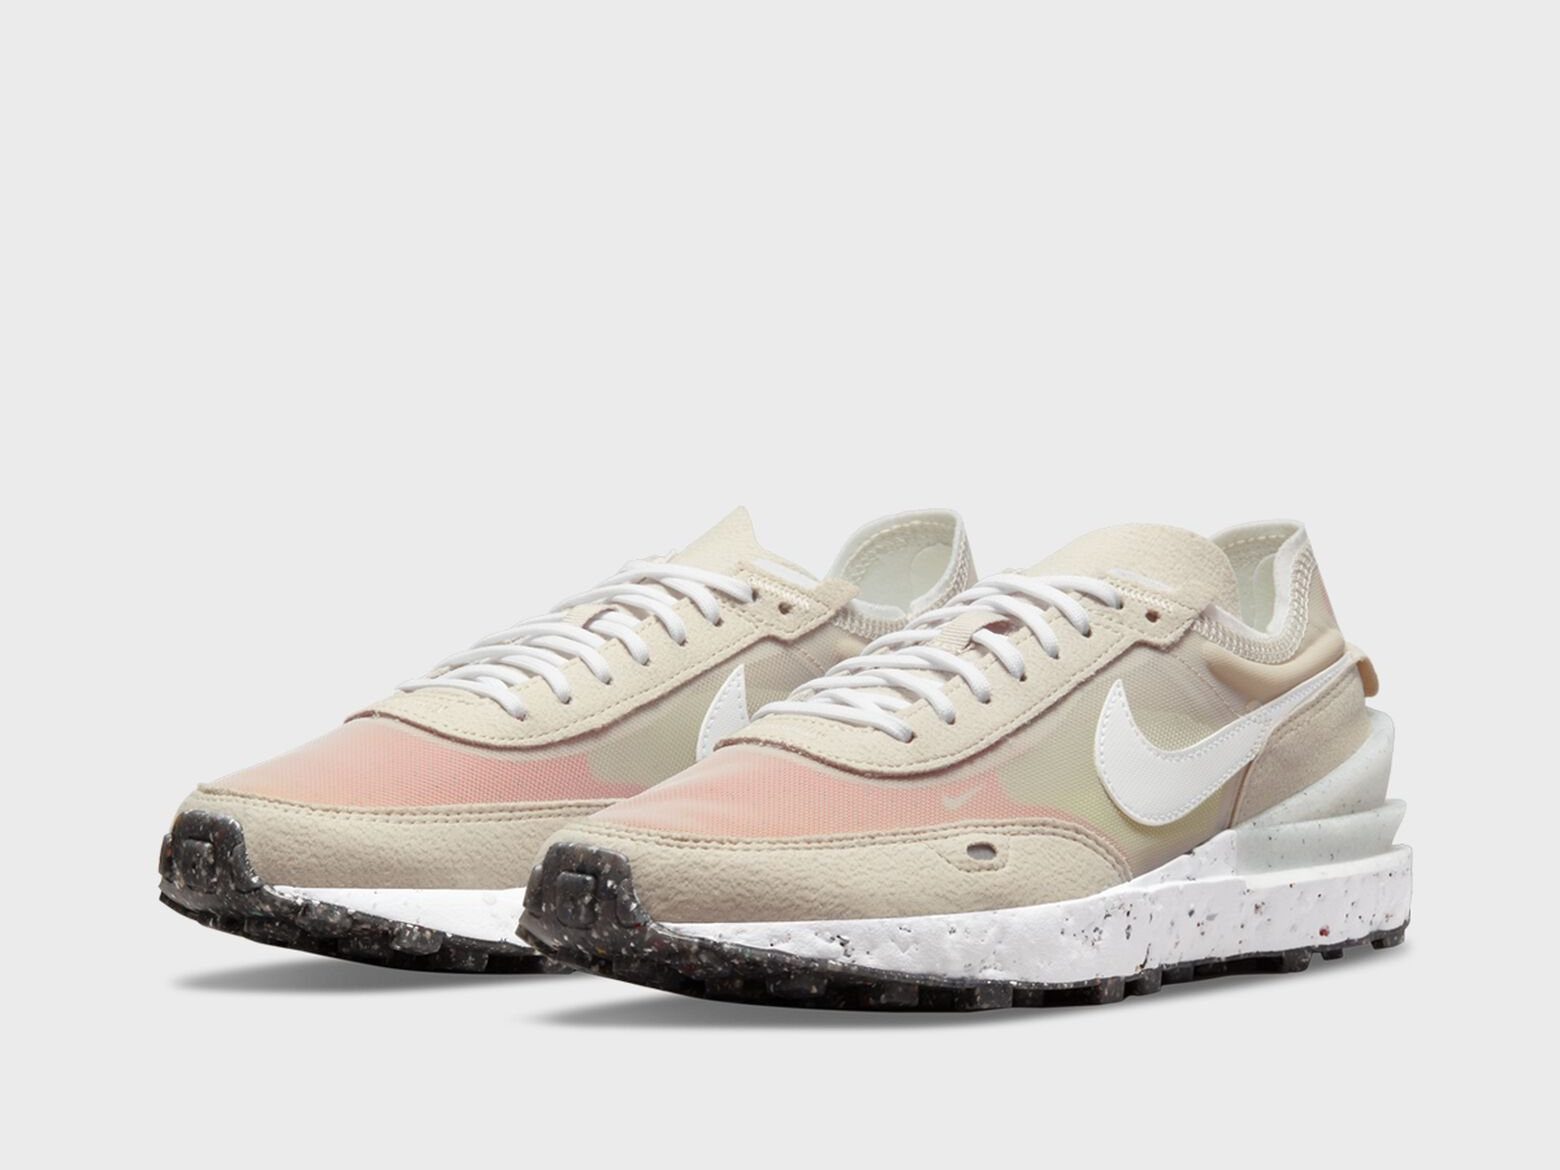 Nike WMNS Waffle One Crater